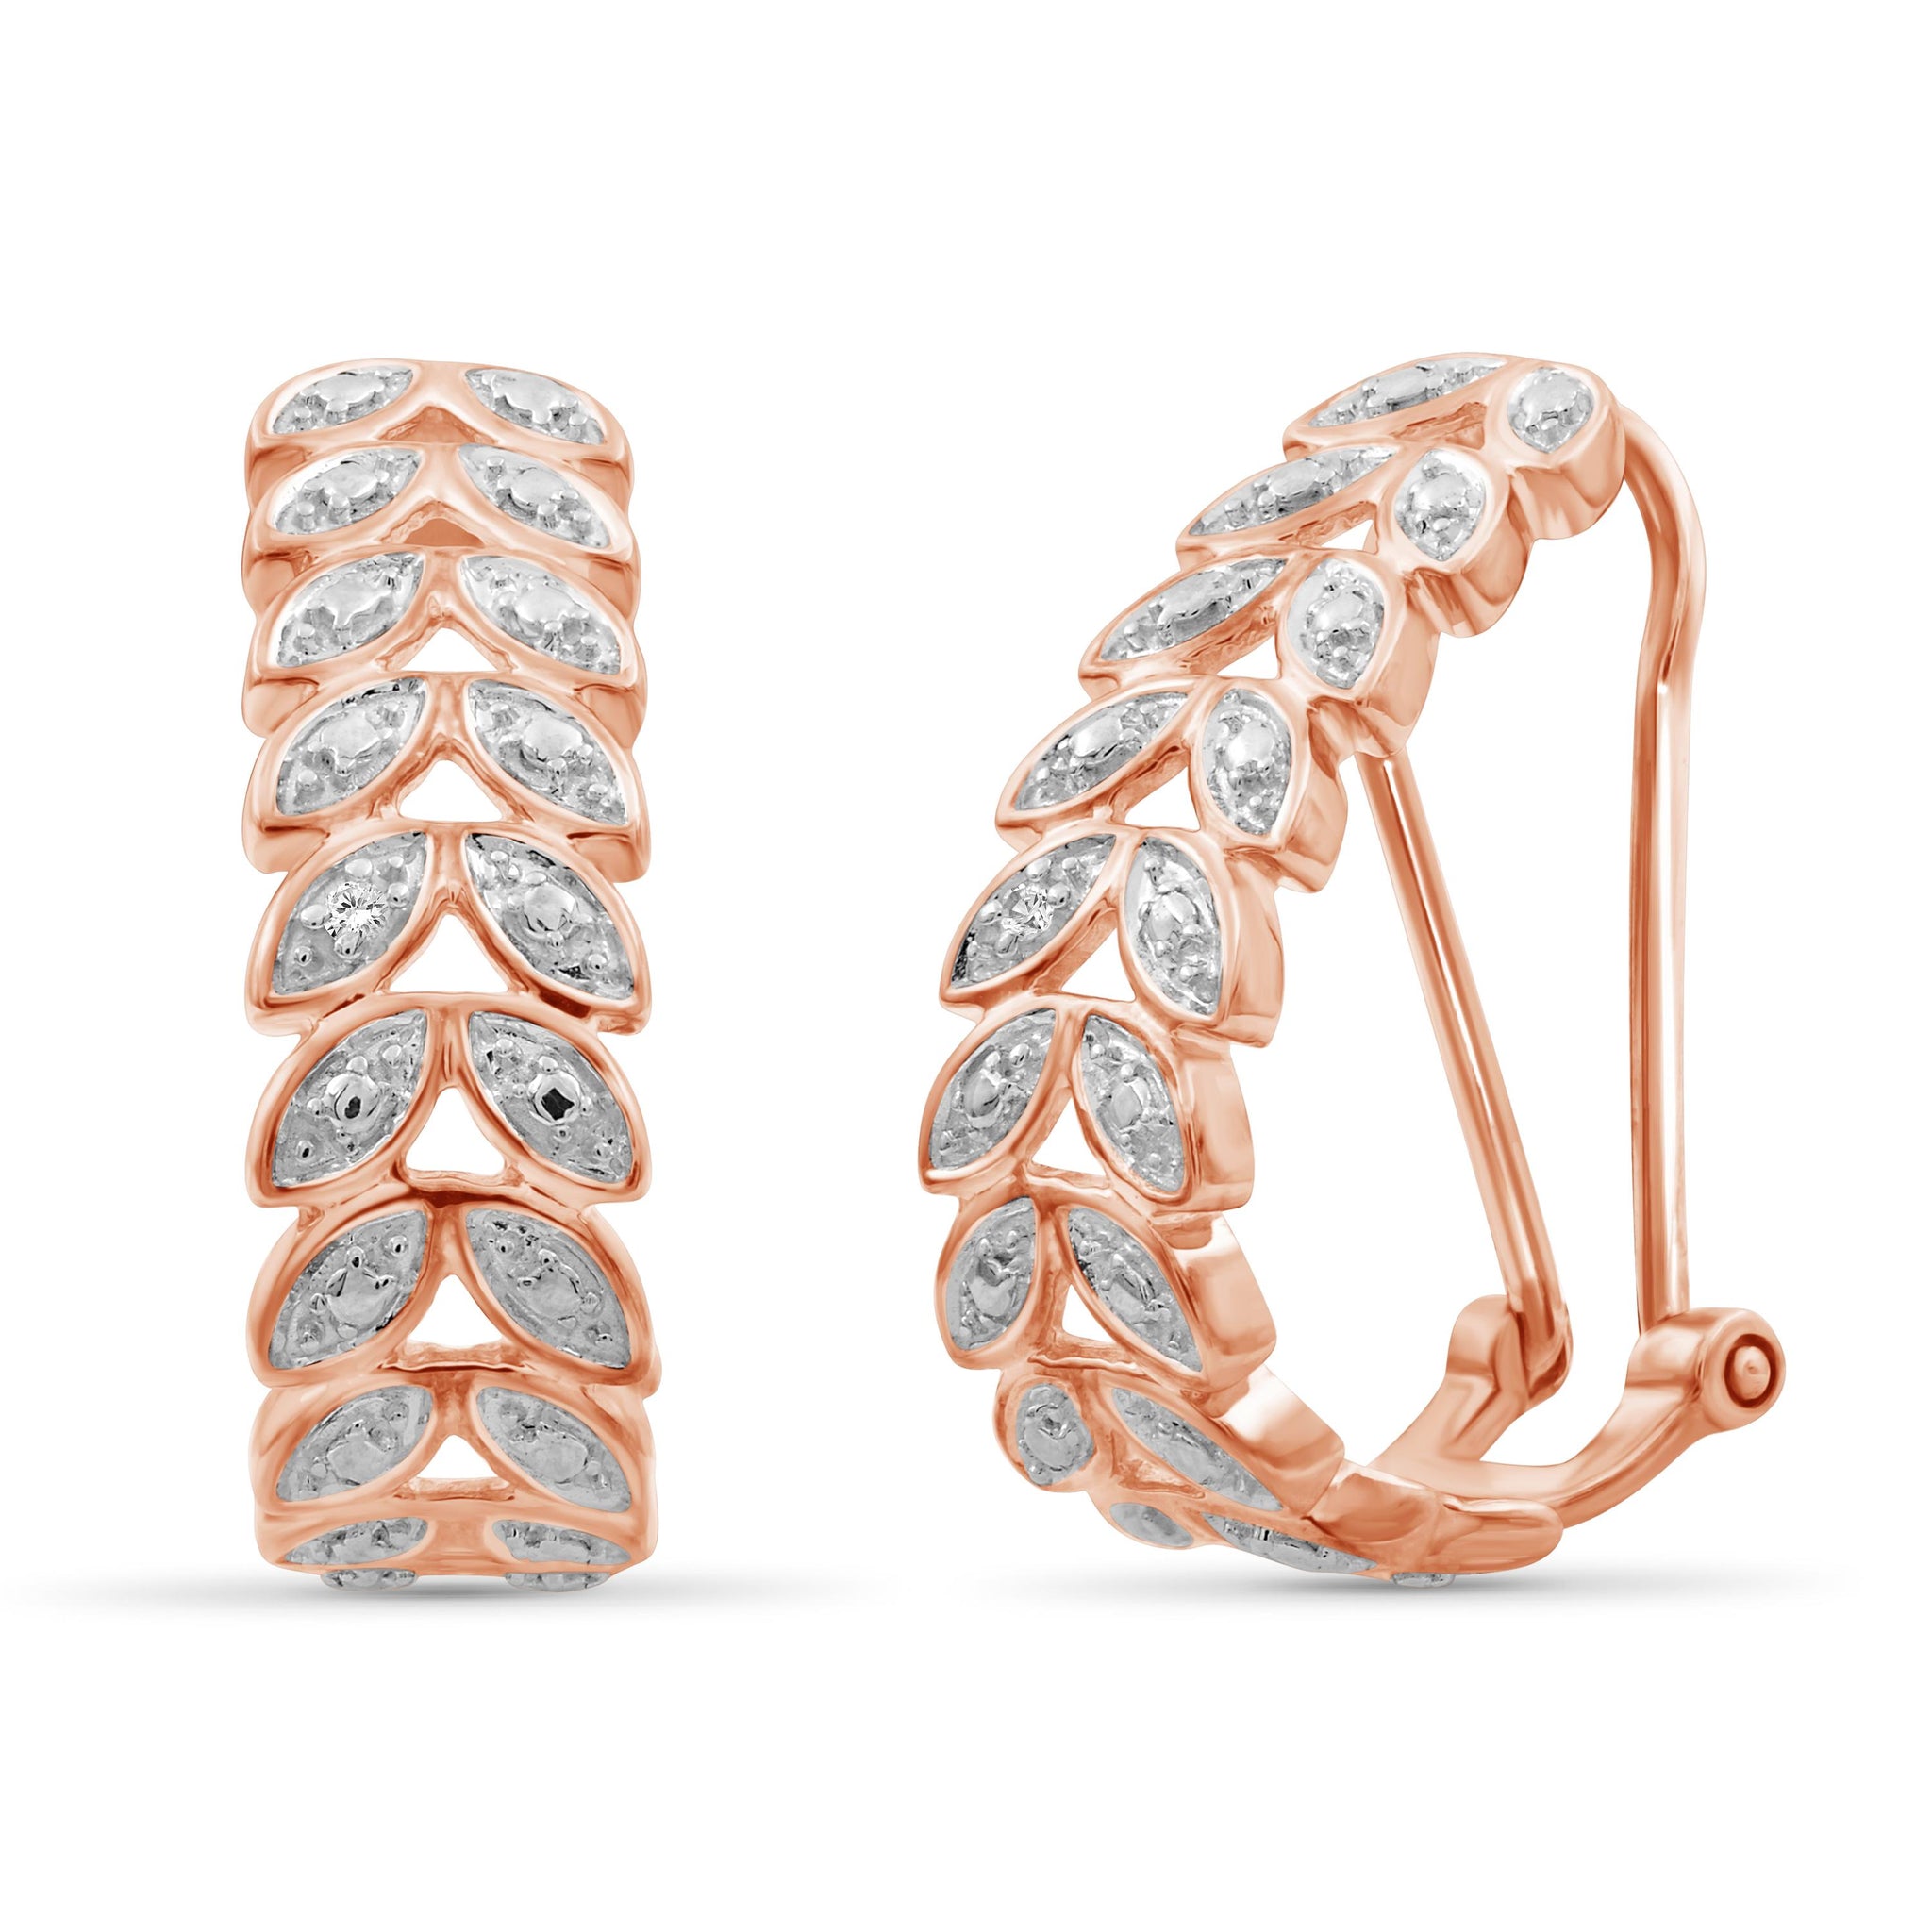 JewelonFire Accent White Diamond Rose Gold Over Silver Leaf Hoop Earrings